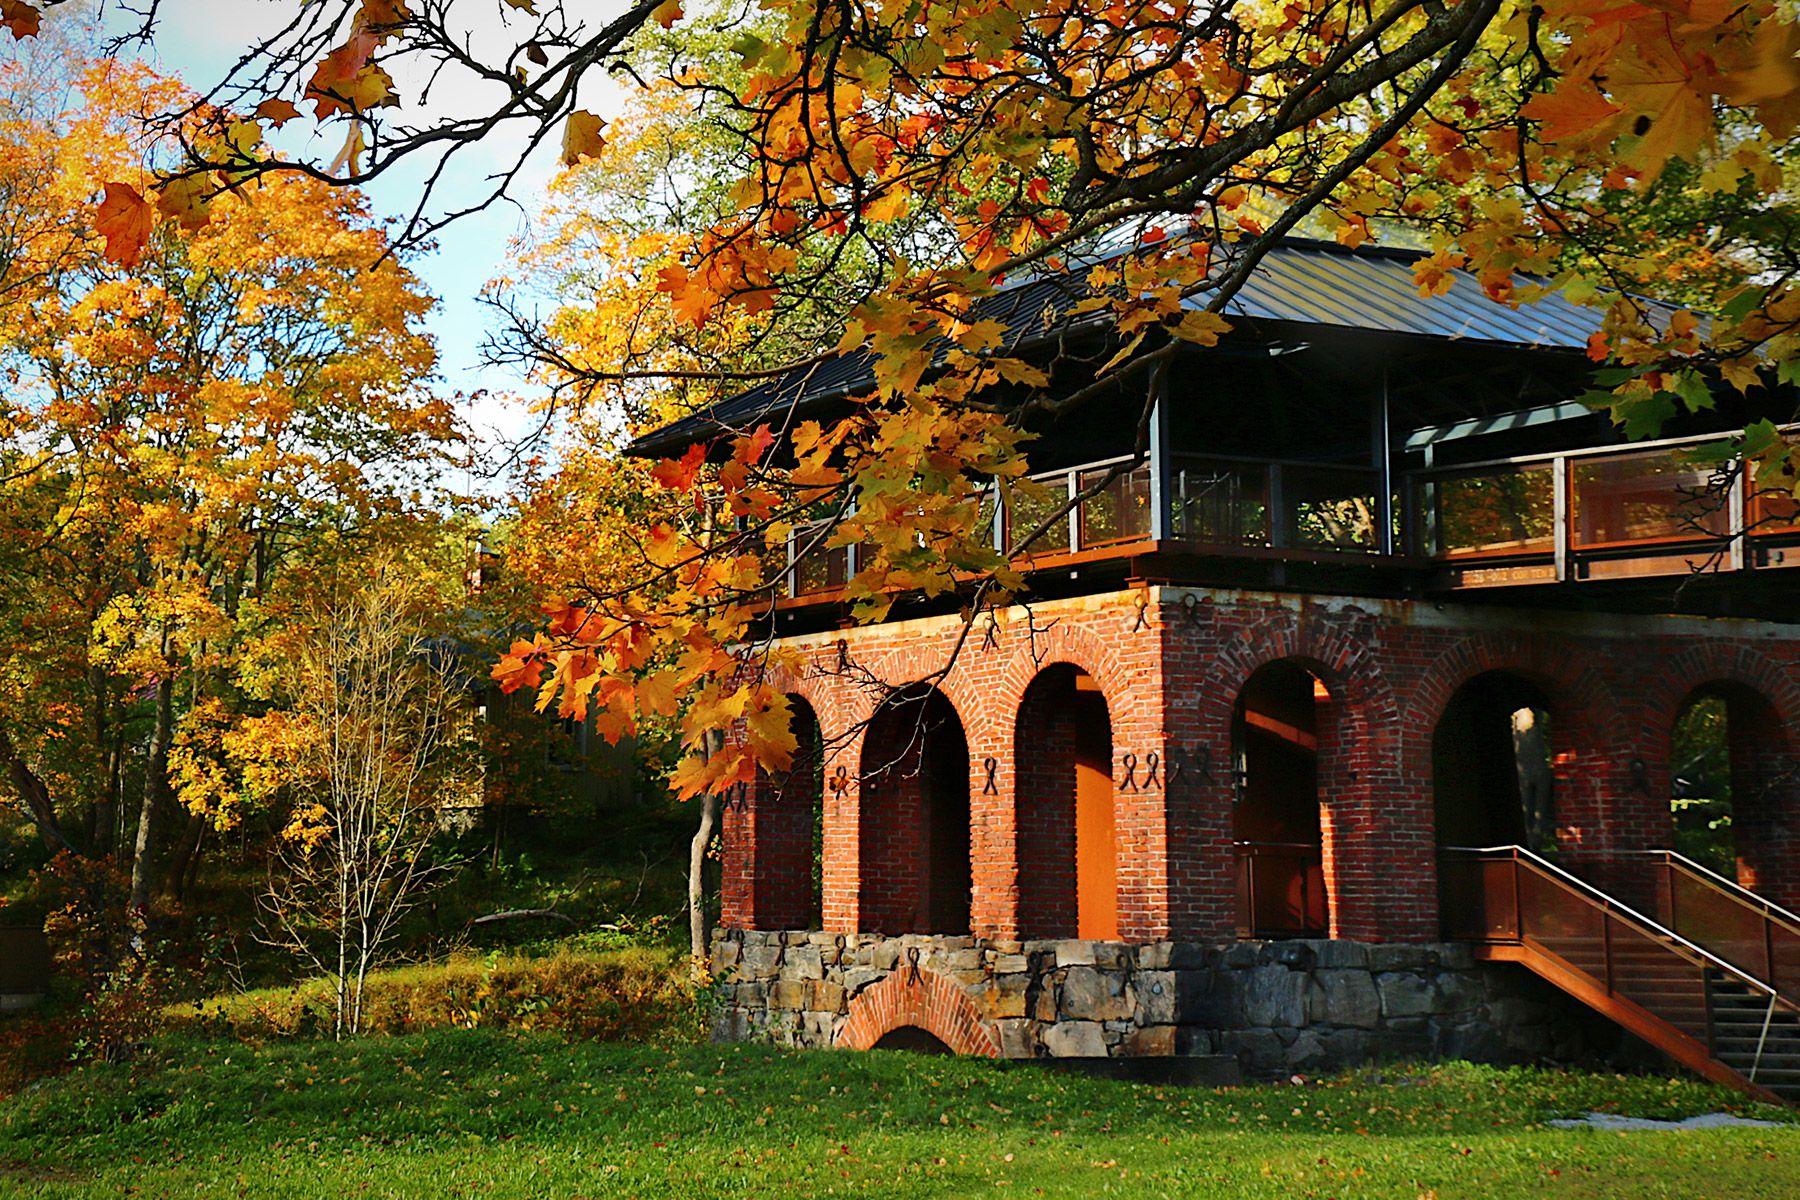 An old building in Dalsbruk surrounded by trees in autumn.